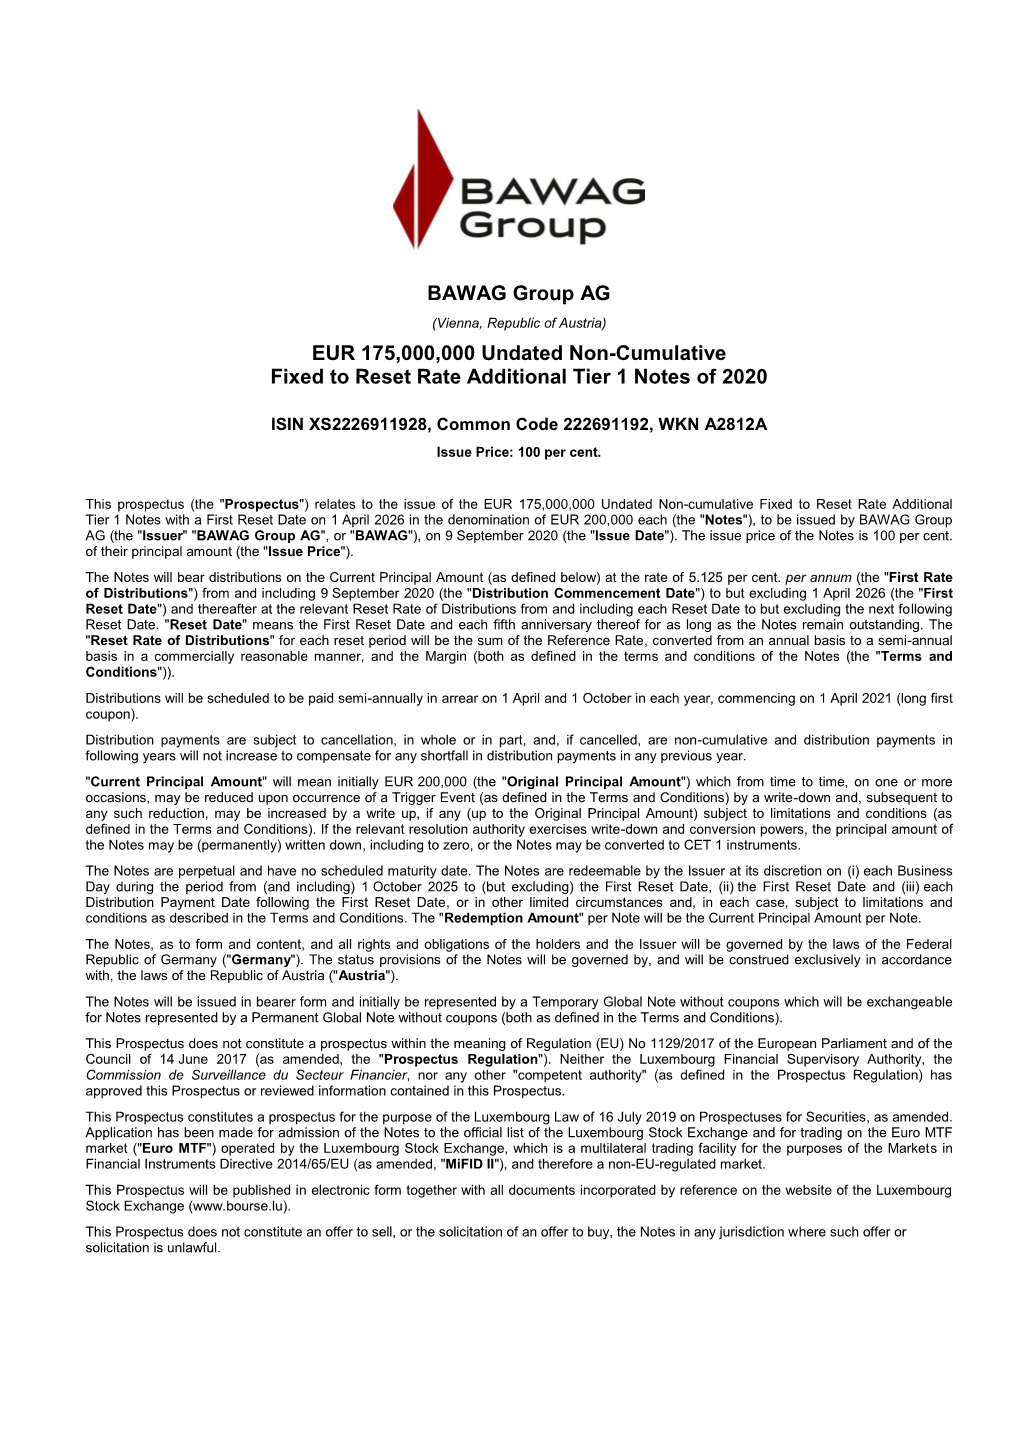 BAWAG Group AG (Vienna, Republic of Austria) EUR 175,000,000 Undated Non-Cumulative Fixed to Reset Rate Additional Tier 1 Notes of 2020